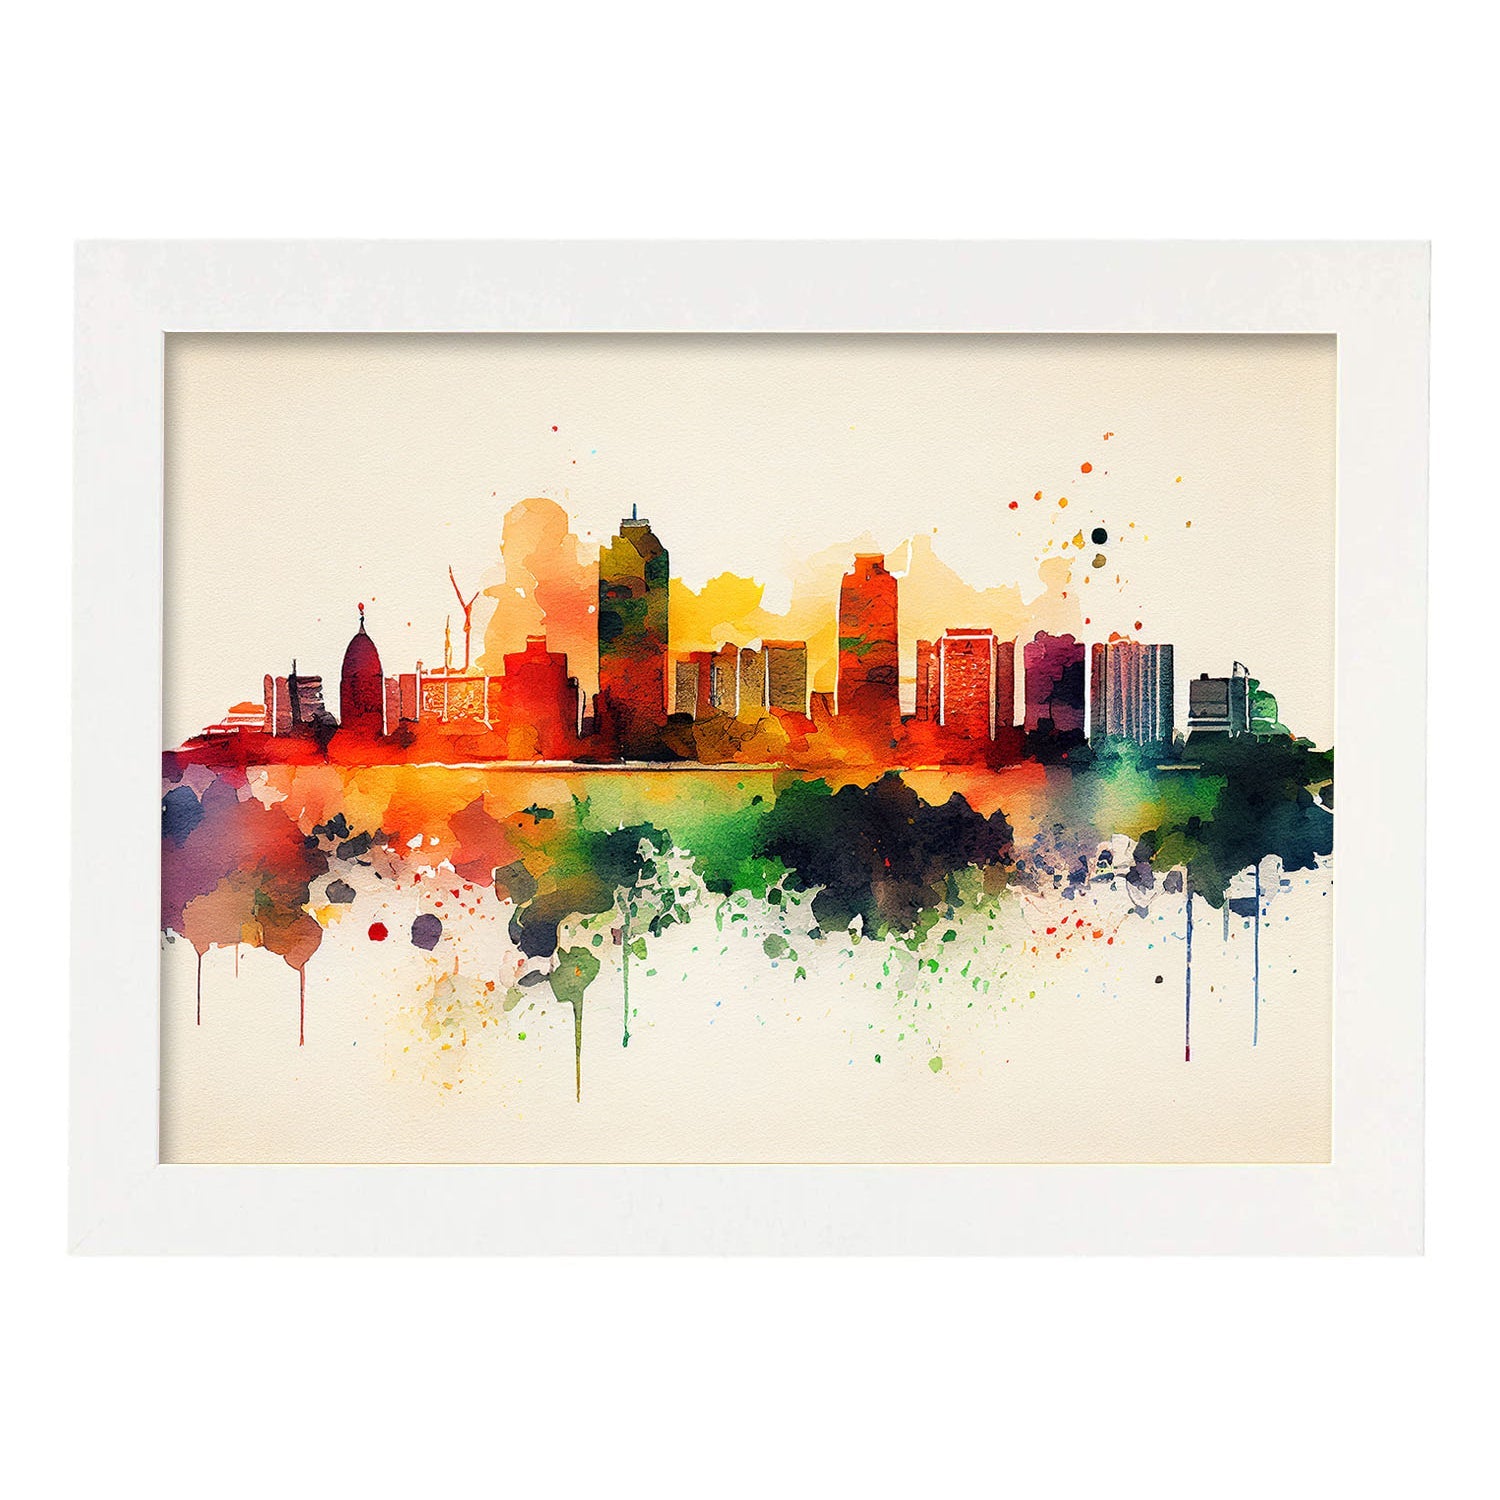 Nacnic watercolor of a skyline of the city of Luanda. Aesthetic Wall Art Prints for Bedroom or Living Room Design.-Artwork-Nacnic-A4-Marco Blanco-Nacnic Estudio SL